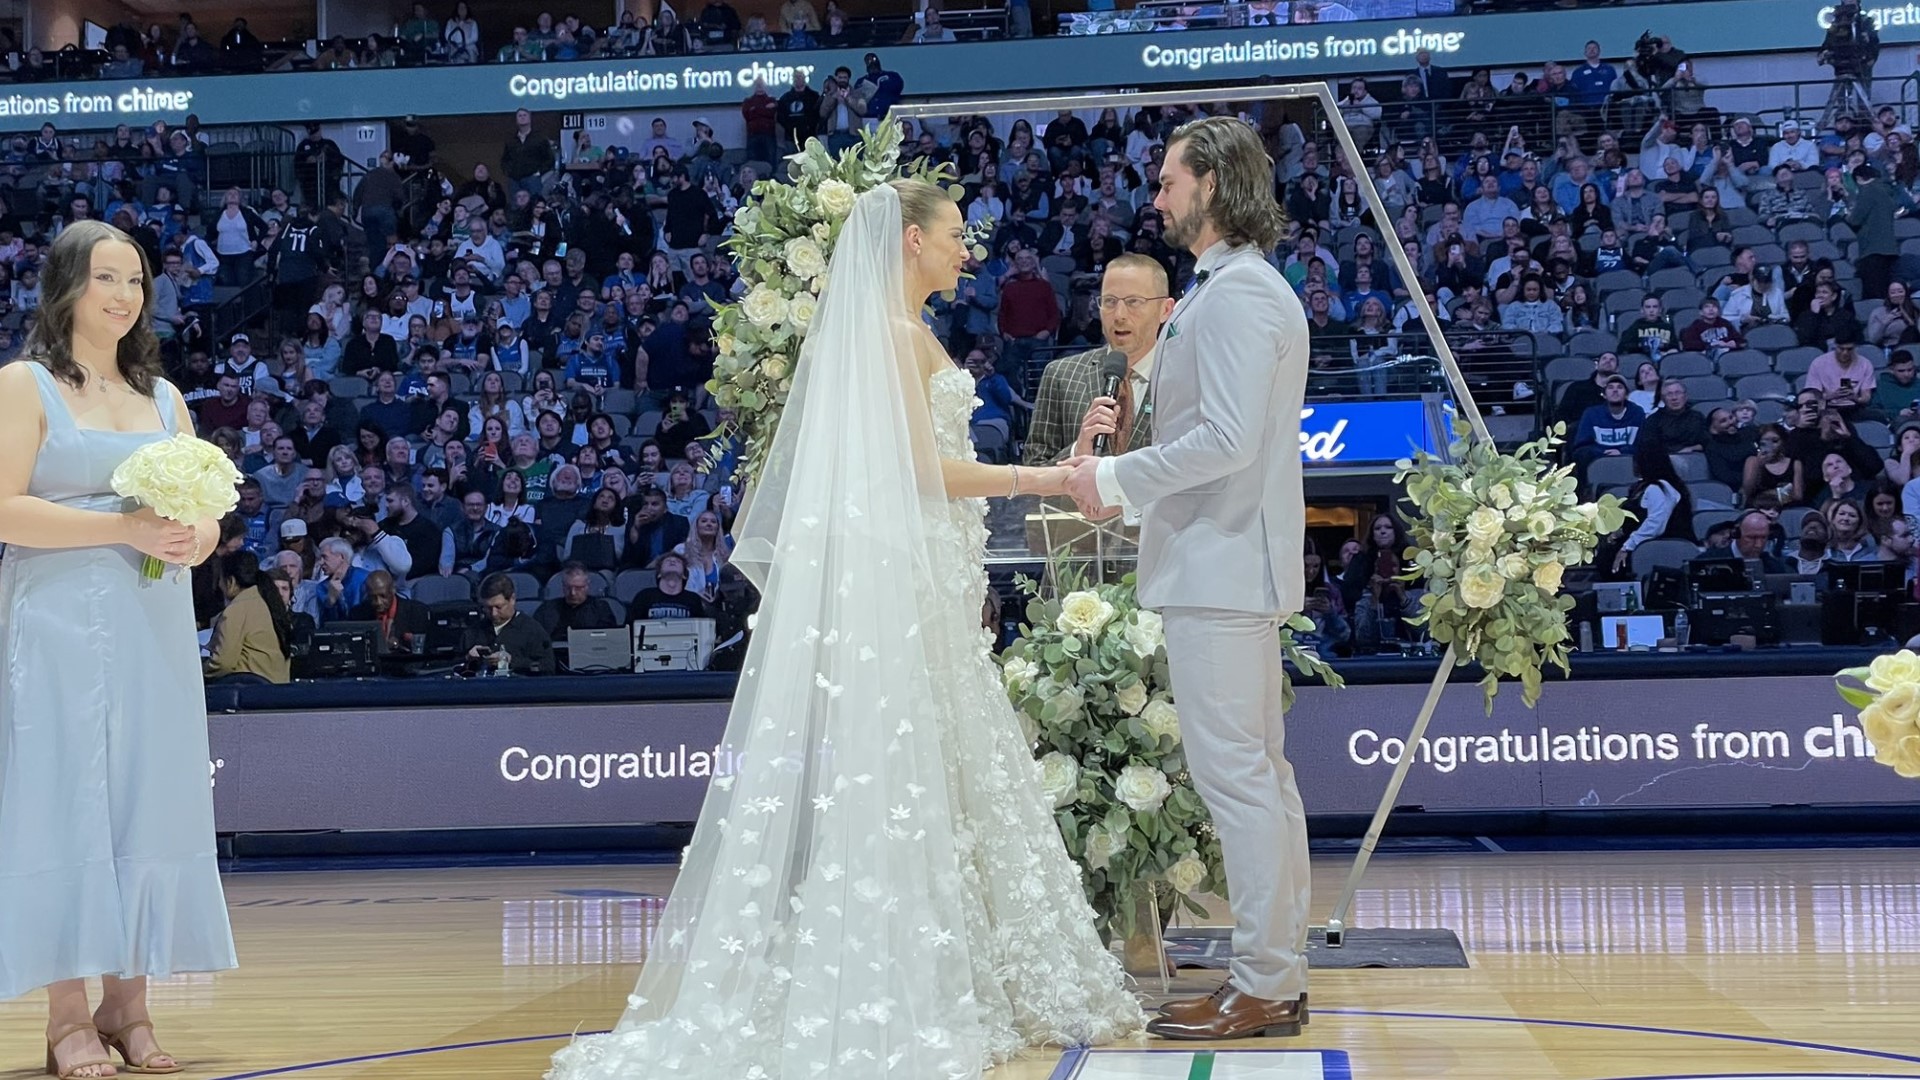 Mavs fans packed the arena for Kyrie Irving's home debut on Monday. But, they soon learned they were also guests at a wedding.